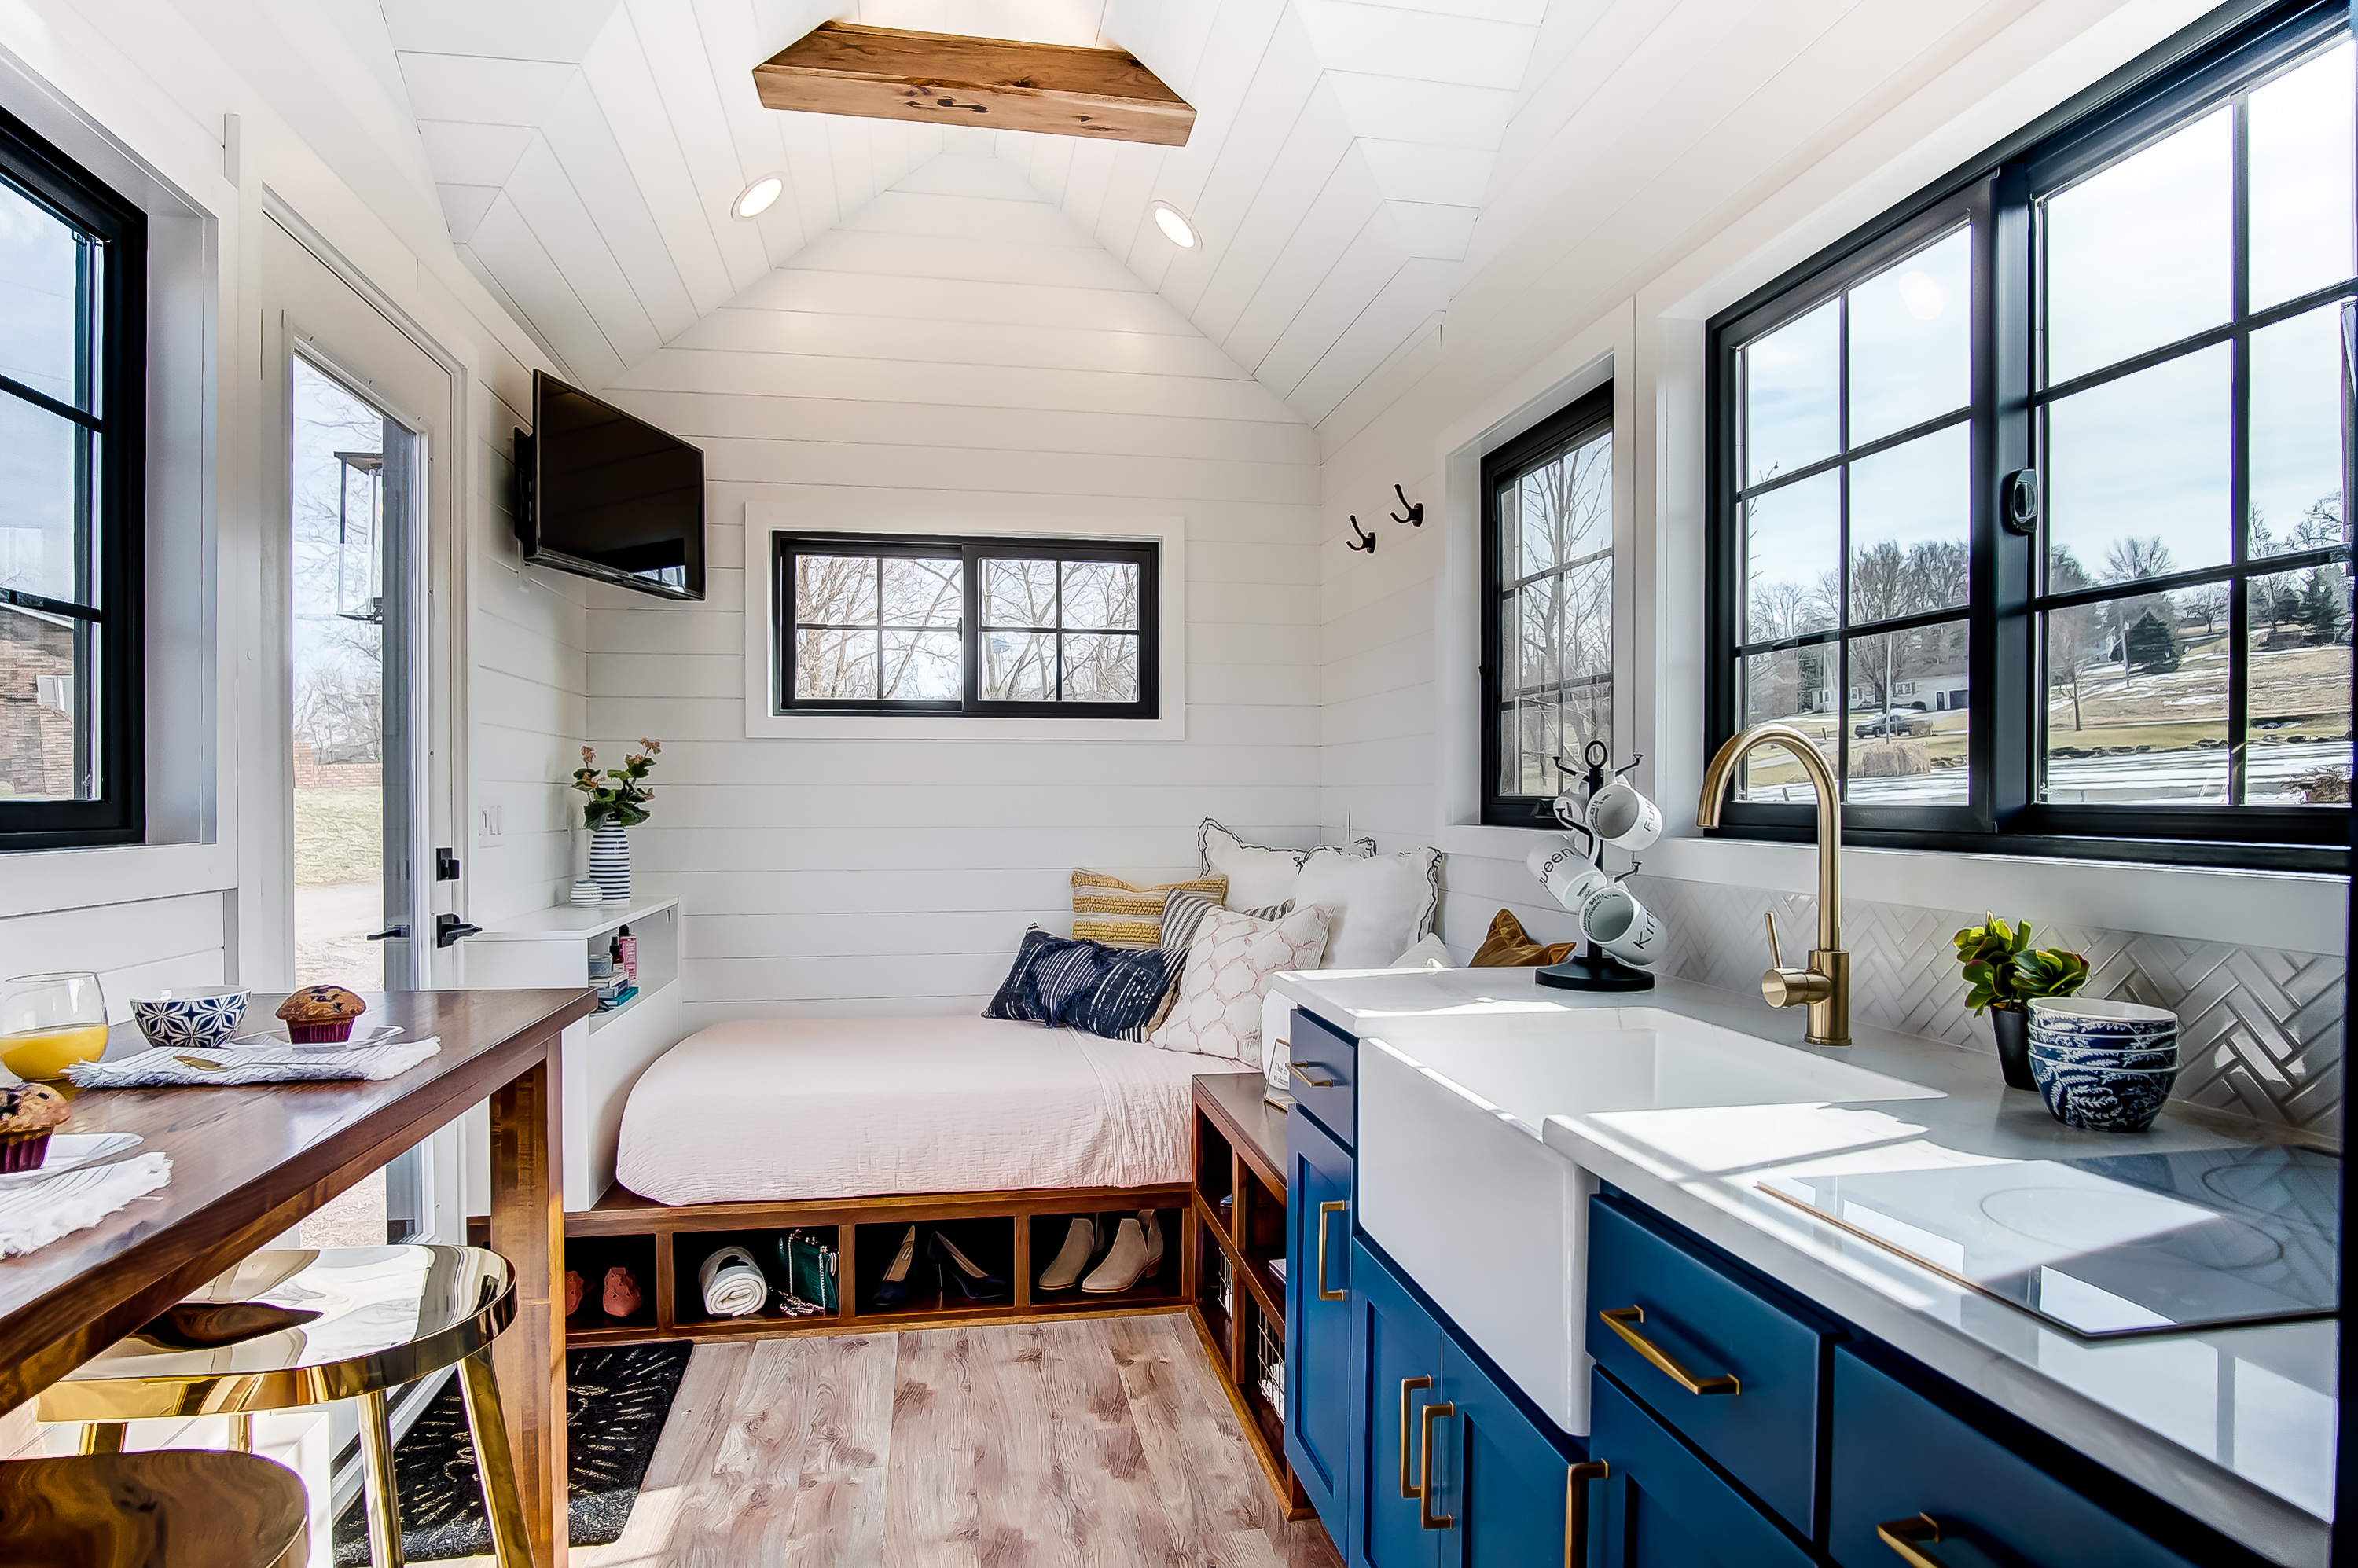 What it's Like Living in a Tiny House